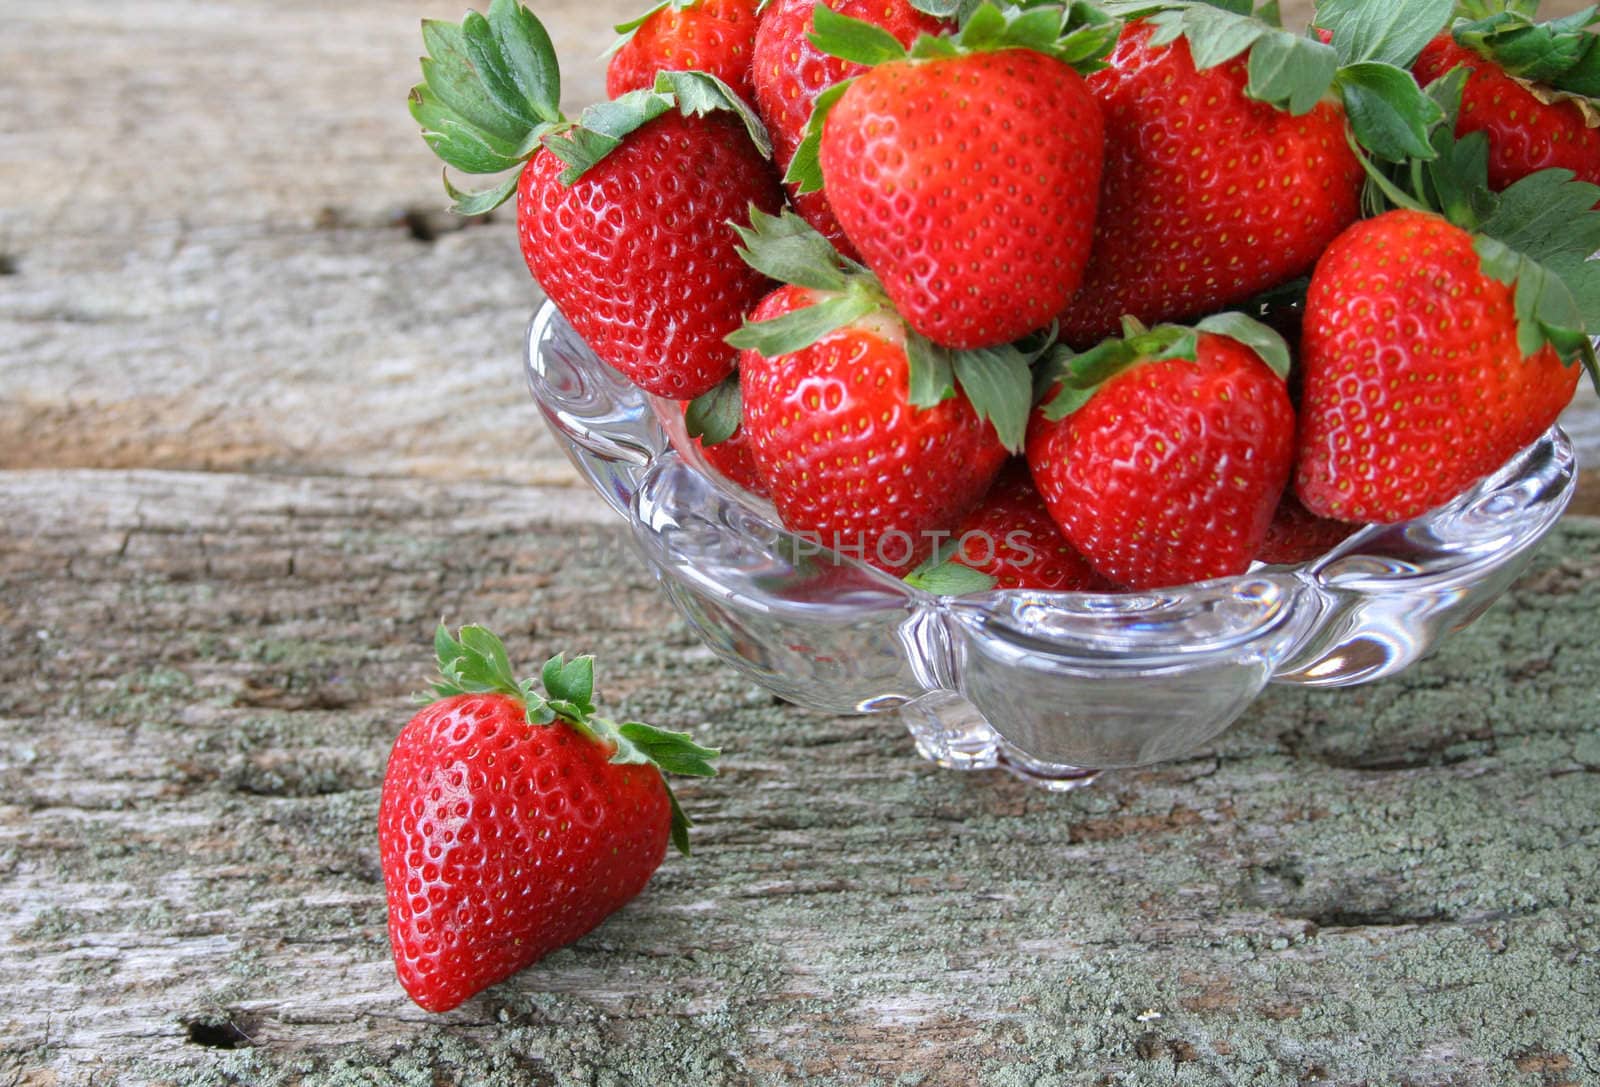 A bowl of fresh picked strawberries in a bowl with one laying on the side.